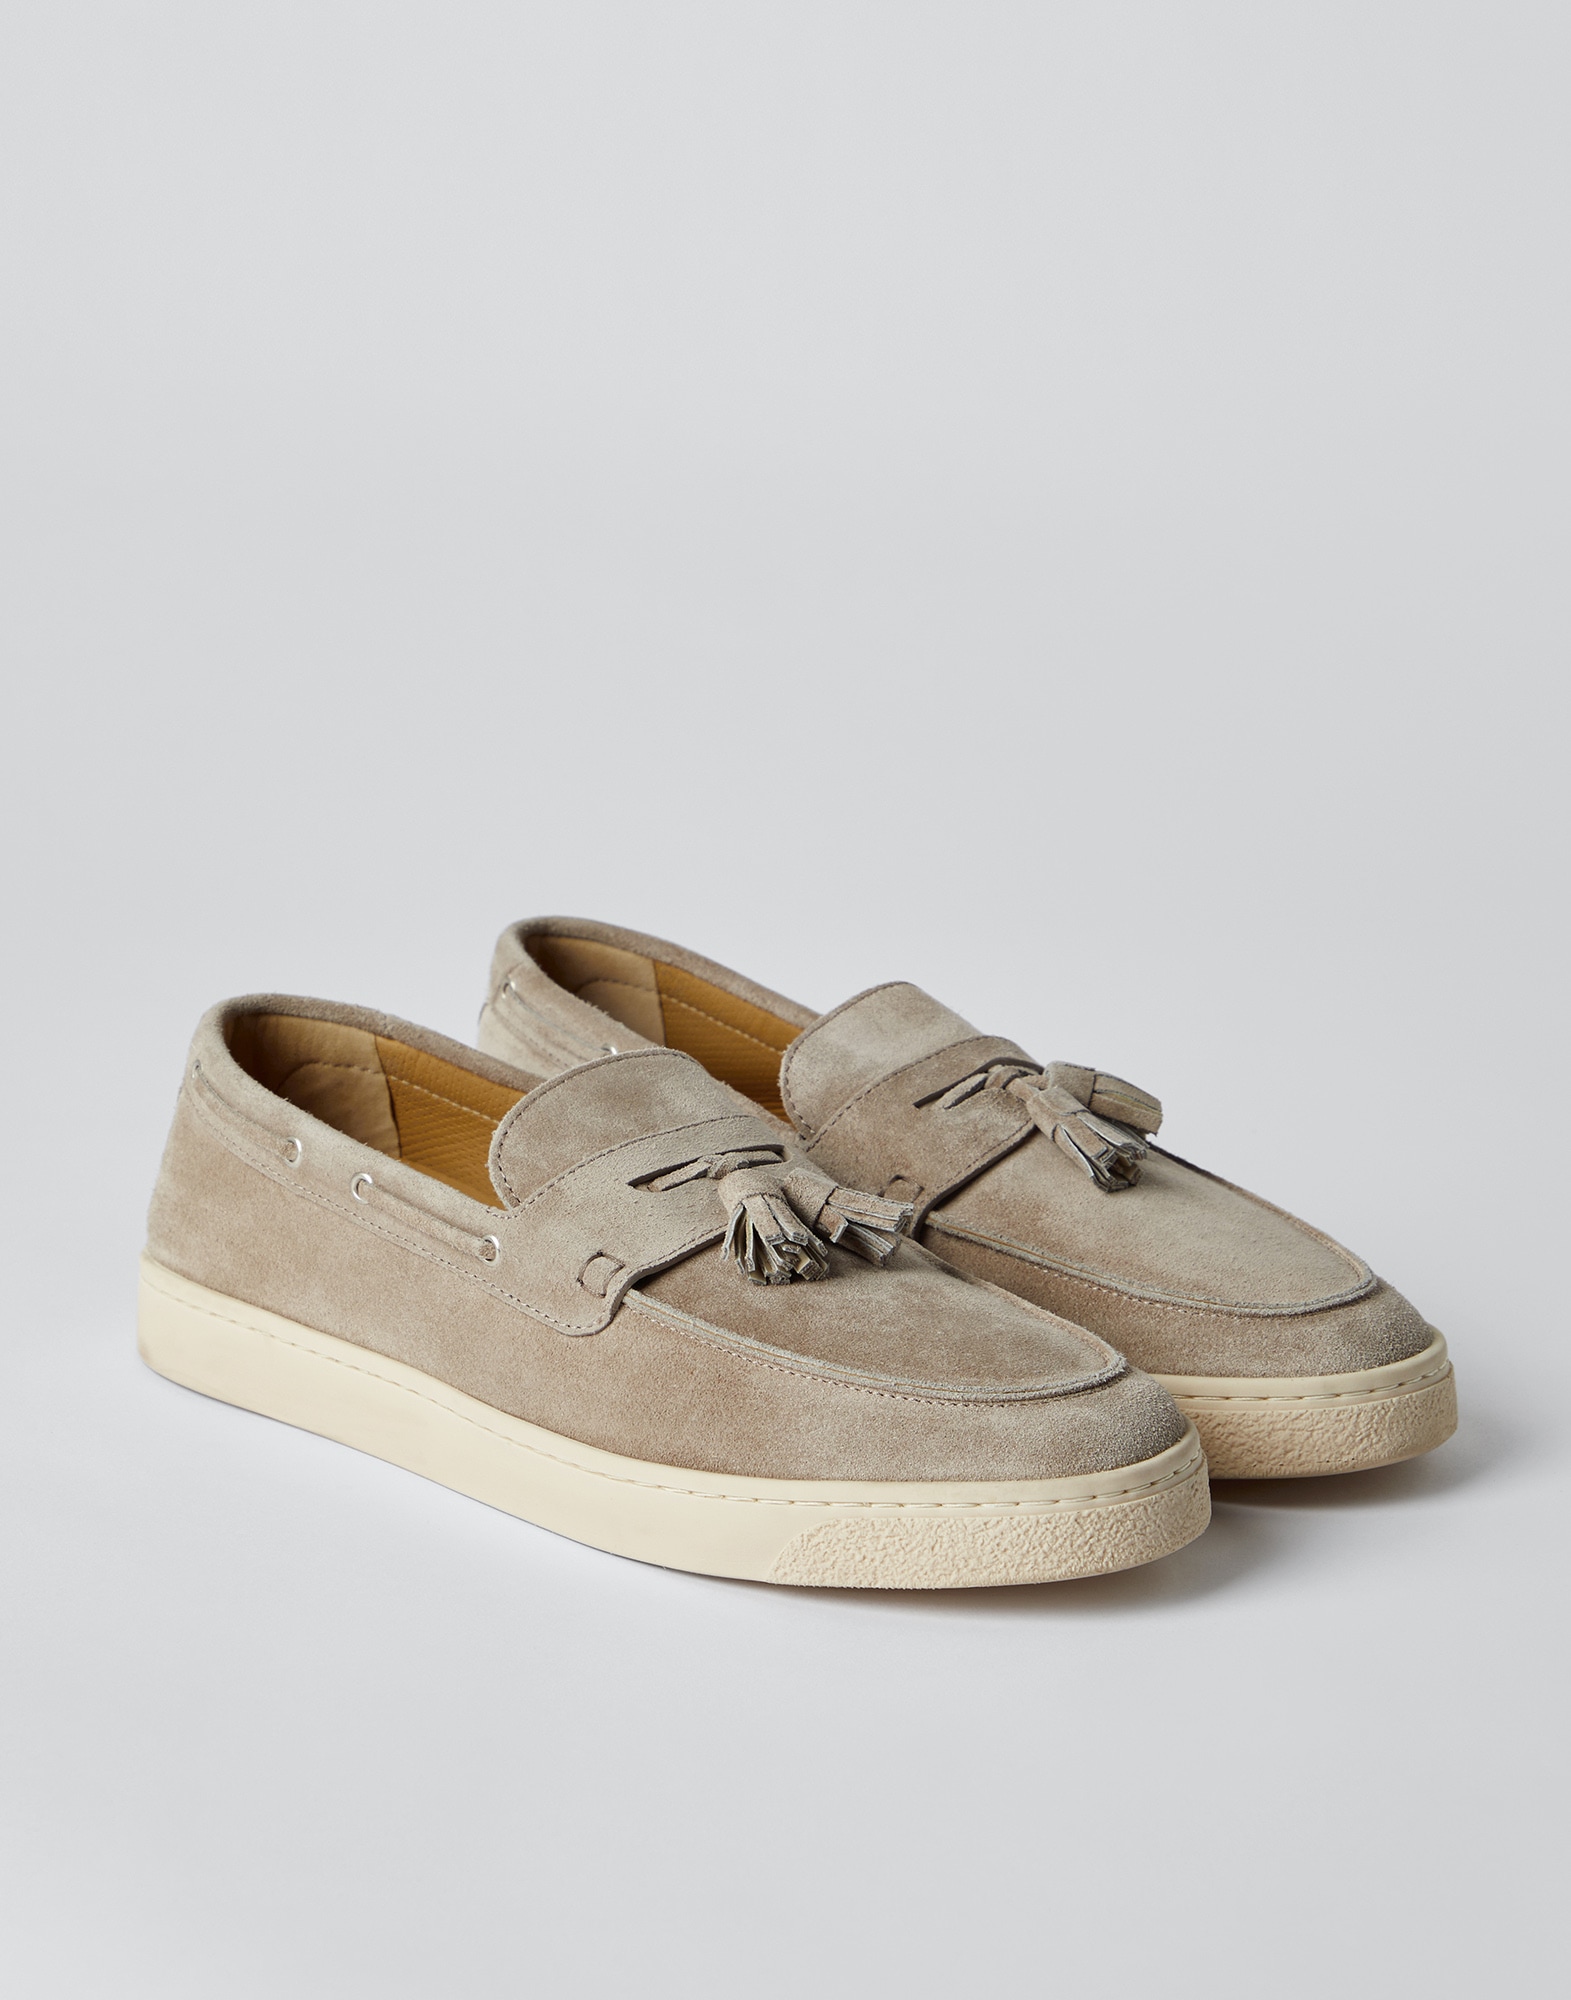 Loafer sneakers